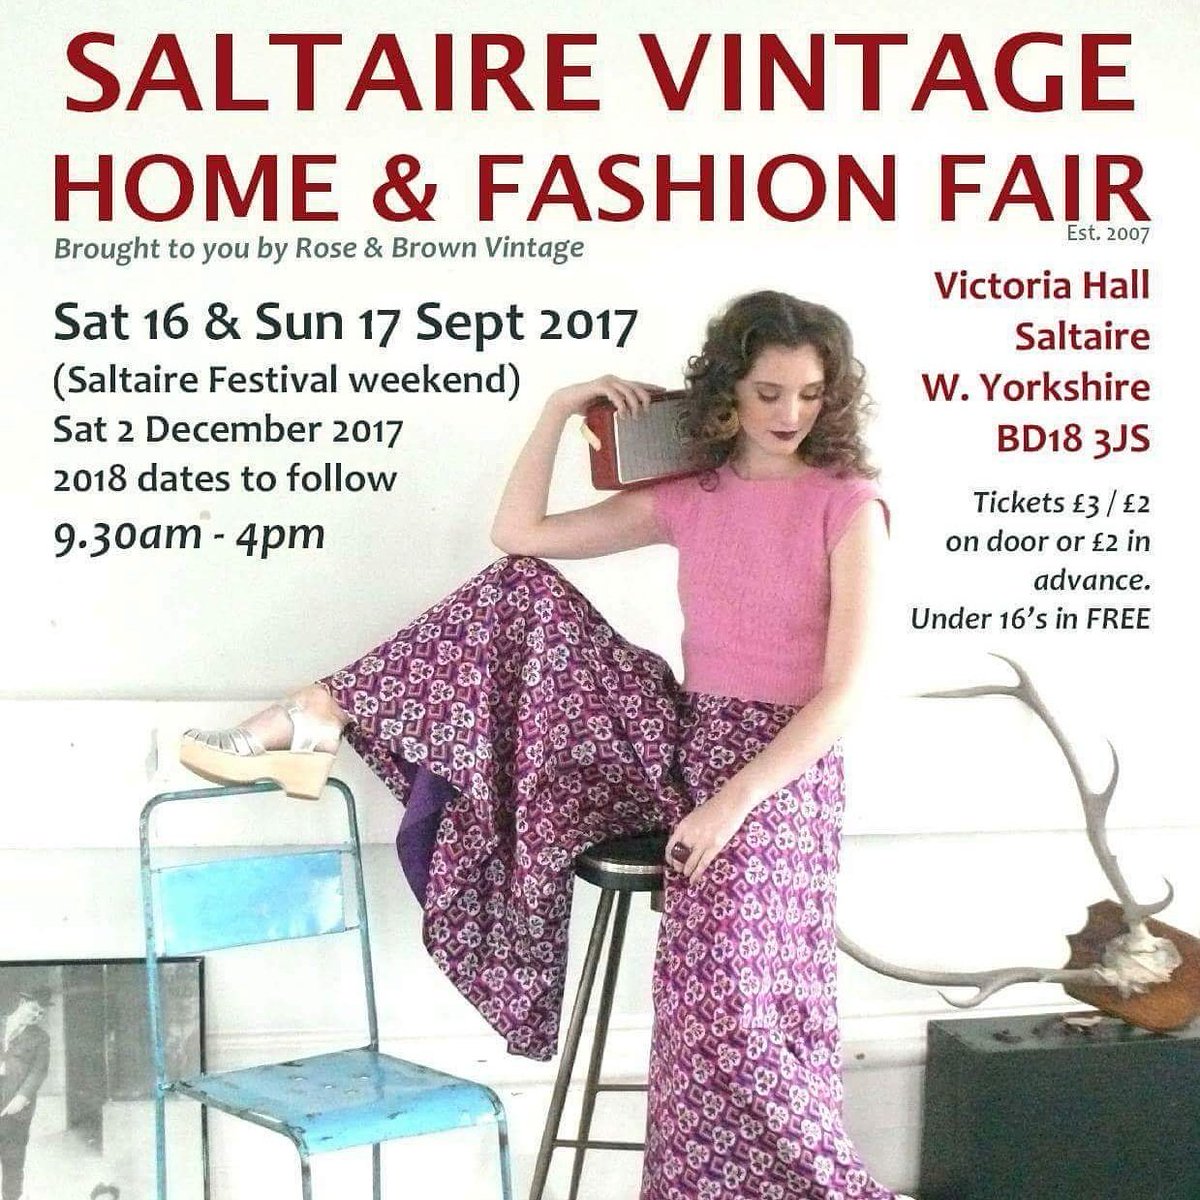 Saltaire Vintage Home & Fashion Fair at @VicHallSaltaire BOTH DAYS THIS WEEKEND  #saltfest17 #Saltaire #SaltaireFestival @YorkshirePromos